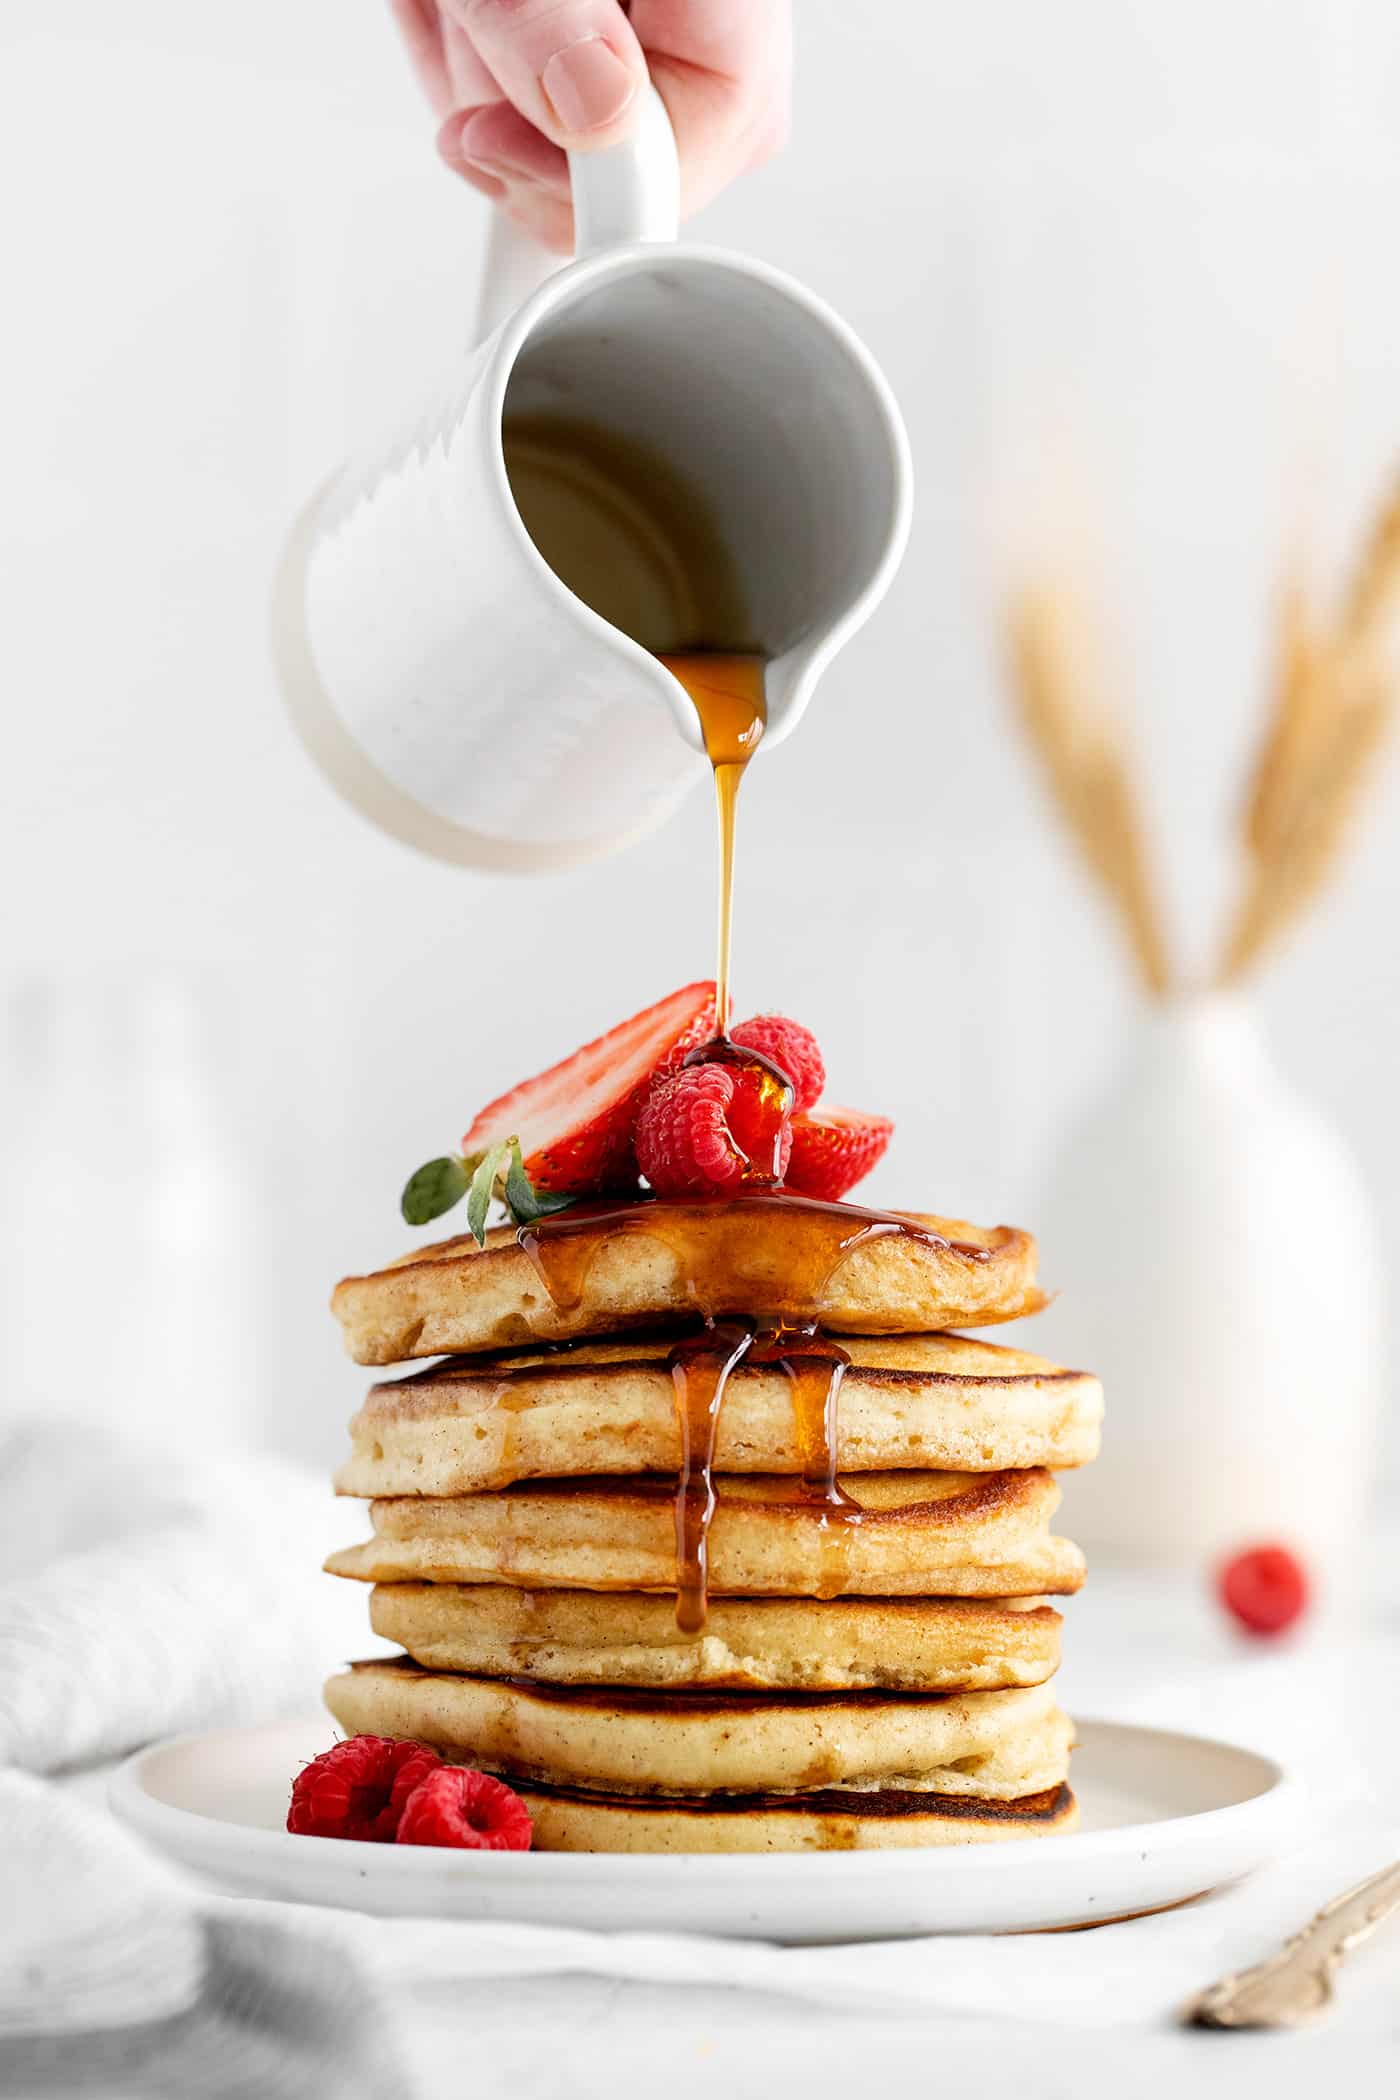 Syrup being poured over a stack of pancakes